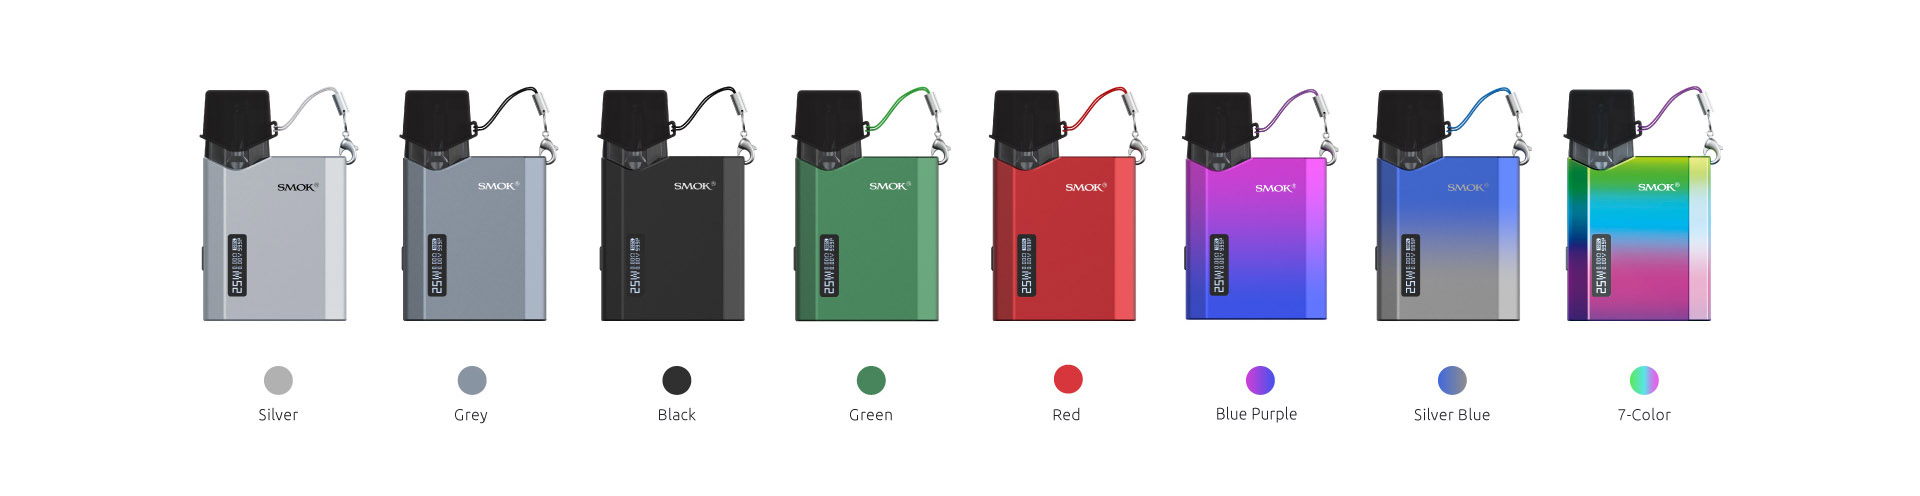 Nfix-mate - SMOK® | Innovation Keeps Changing the Vaping Experience